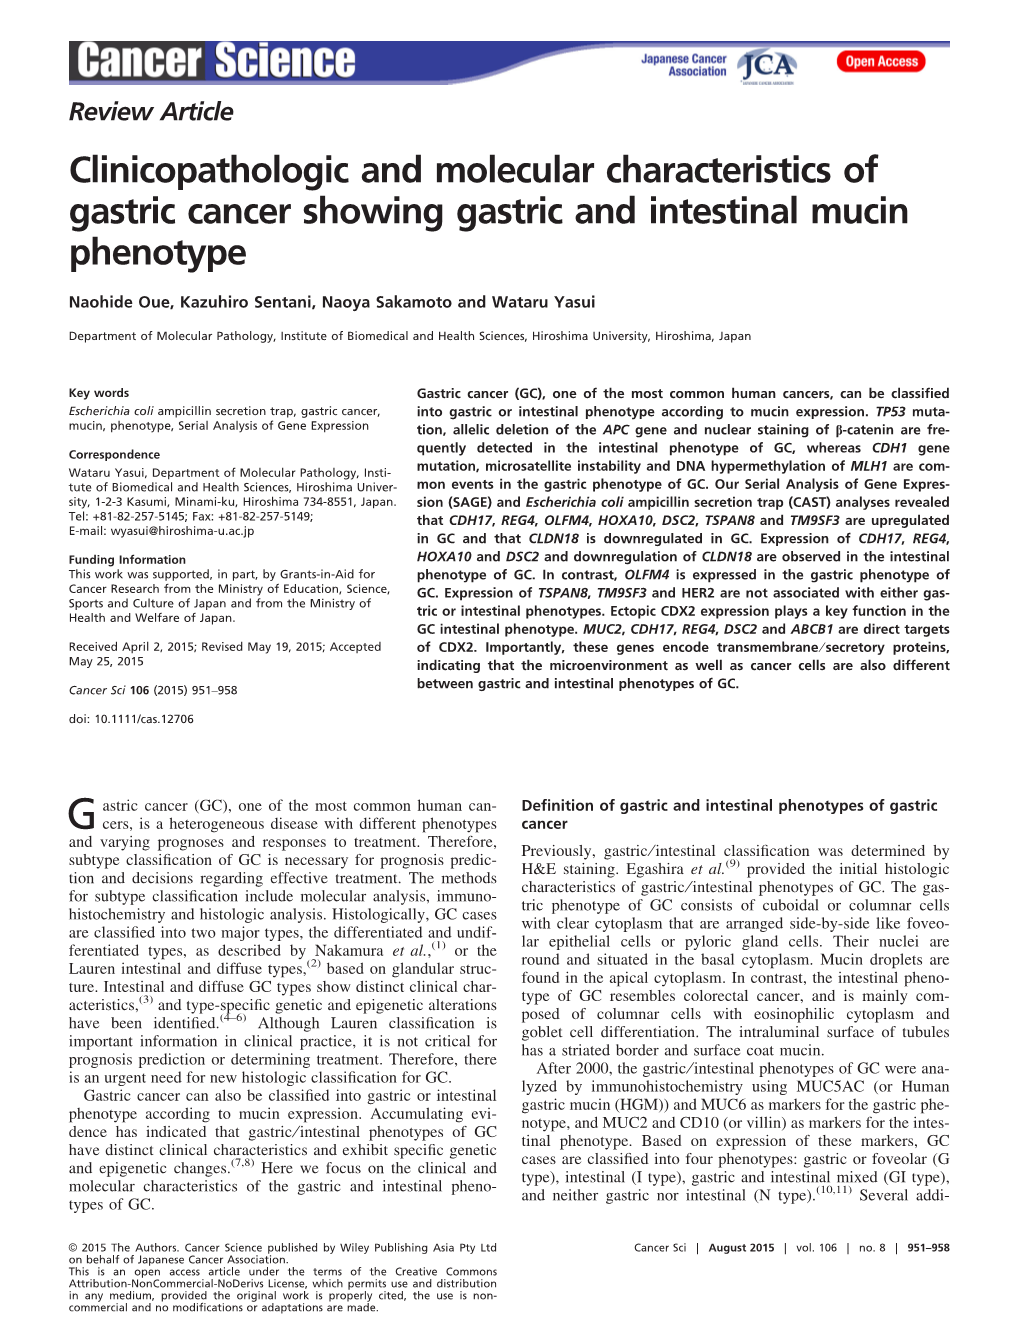 Clinicopathologic and Molecular Characteristics of Gastric Cancer Showing Gastric and Intestinal Mucin Phenotype